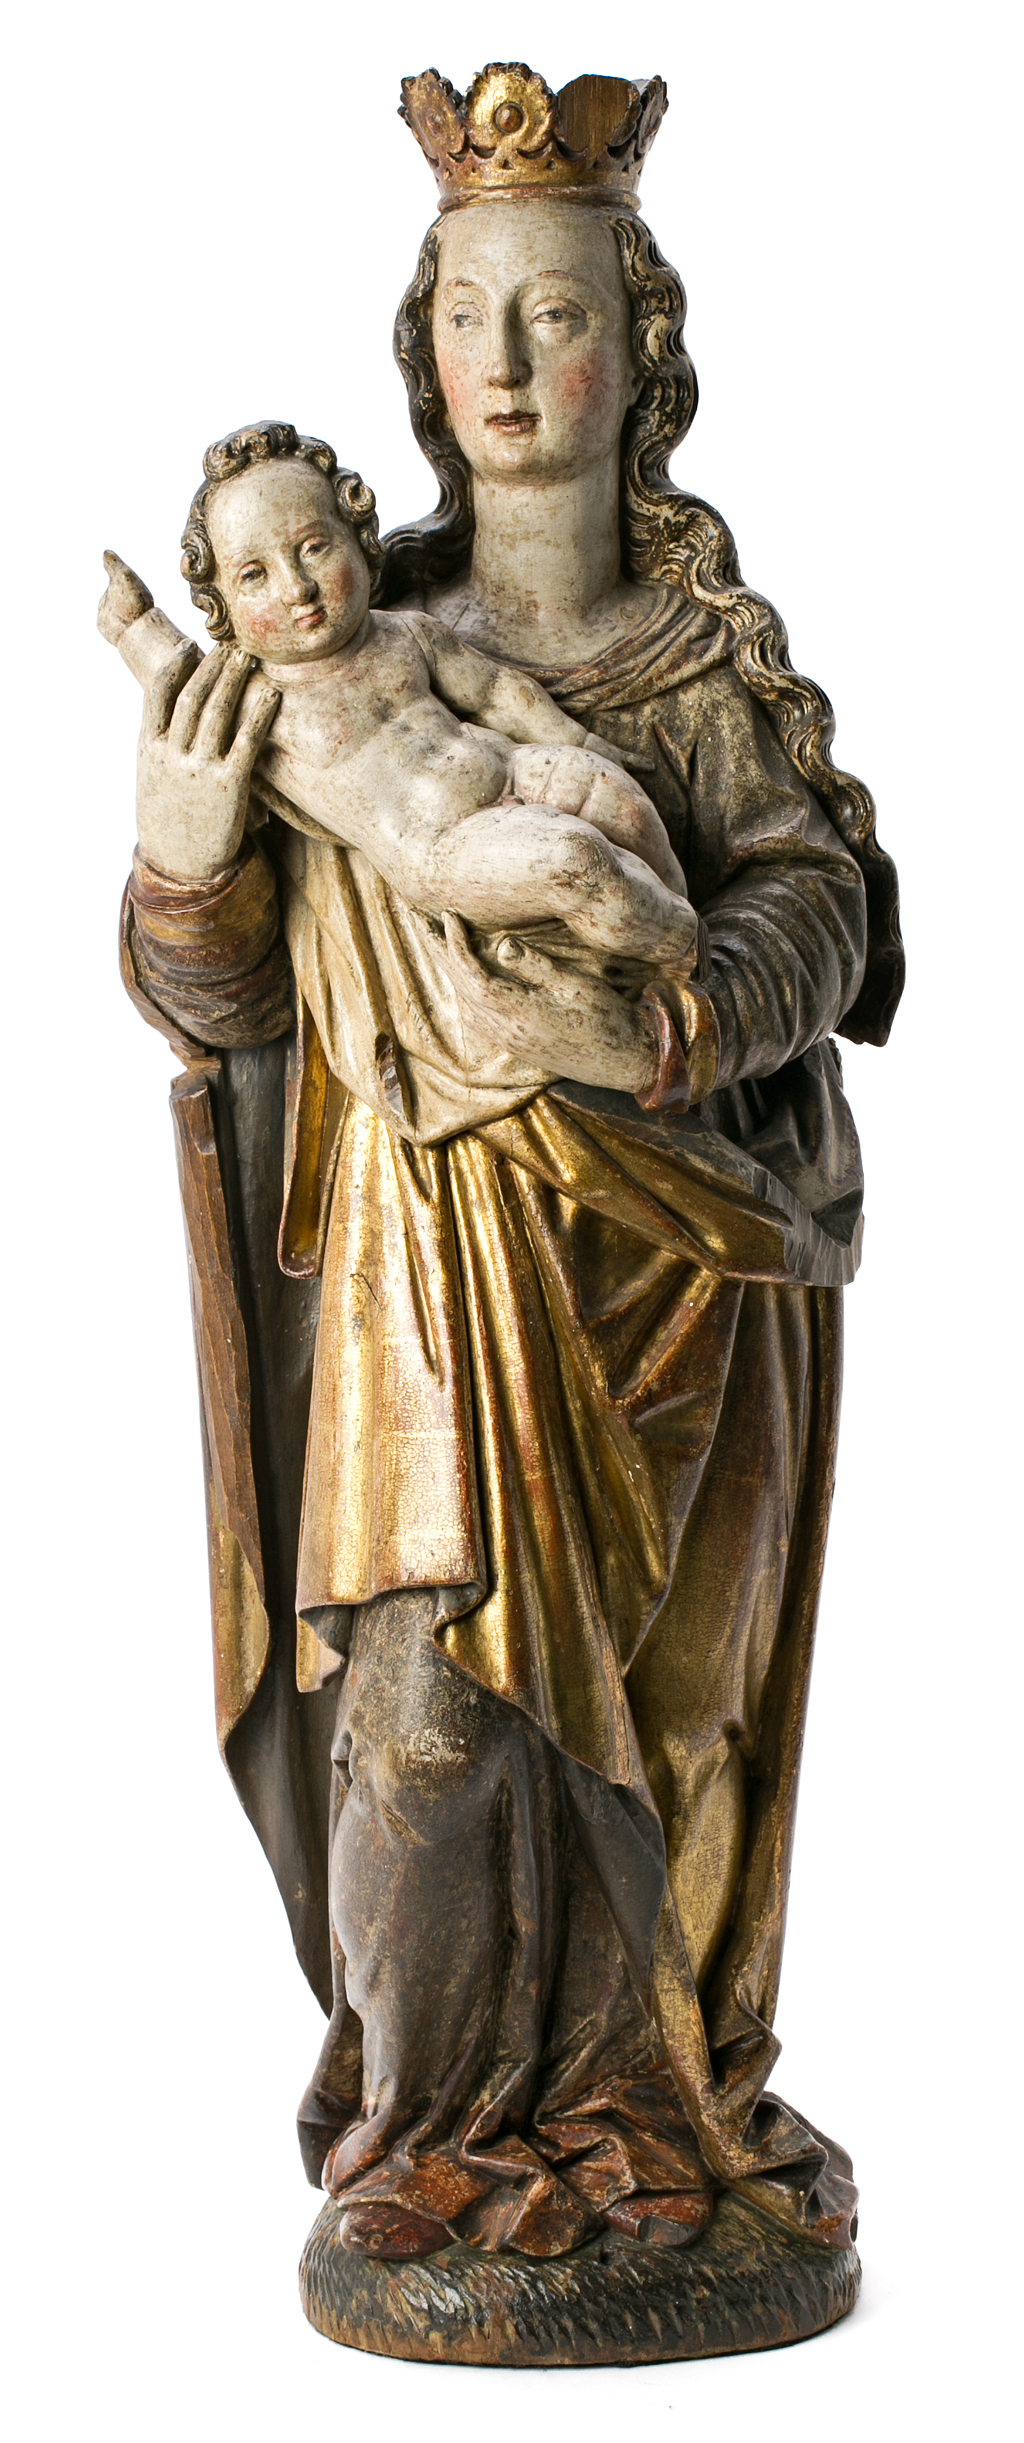 Southern German school, late 15th Century The Virgin and Child Carved, gilt and polychromed wooden